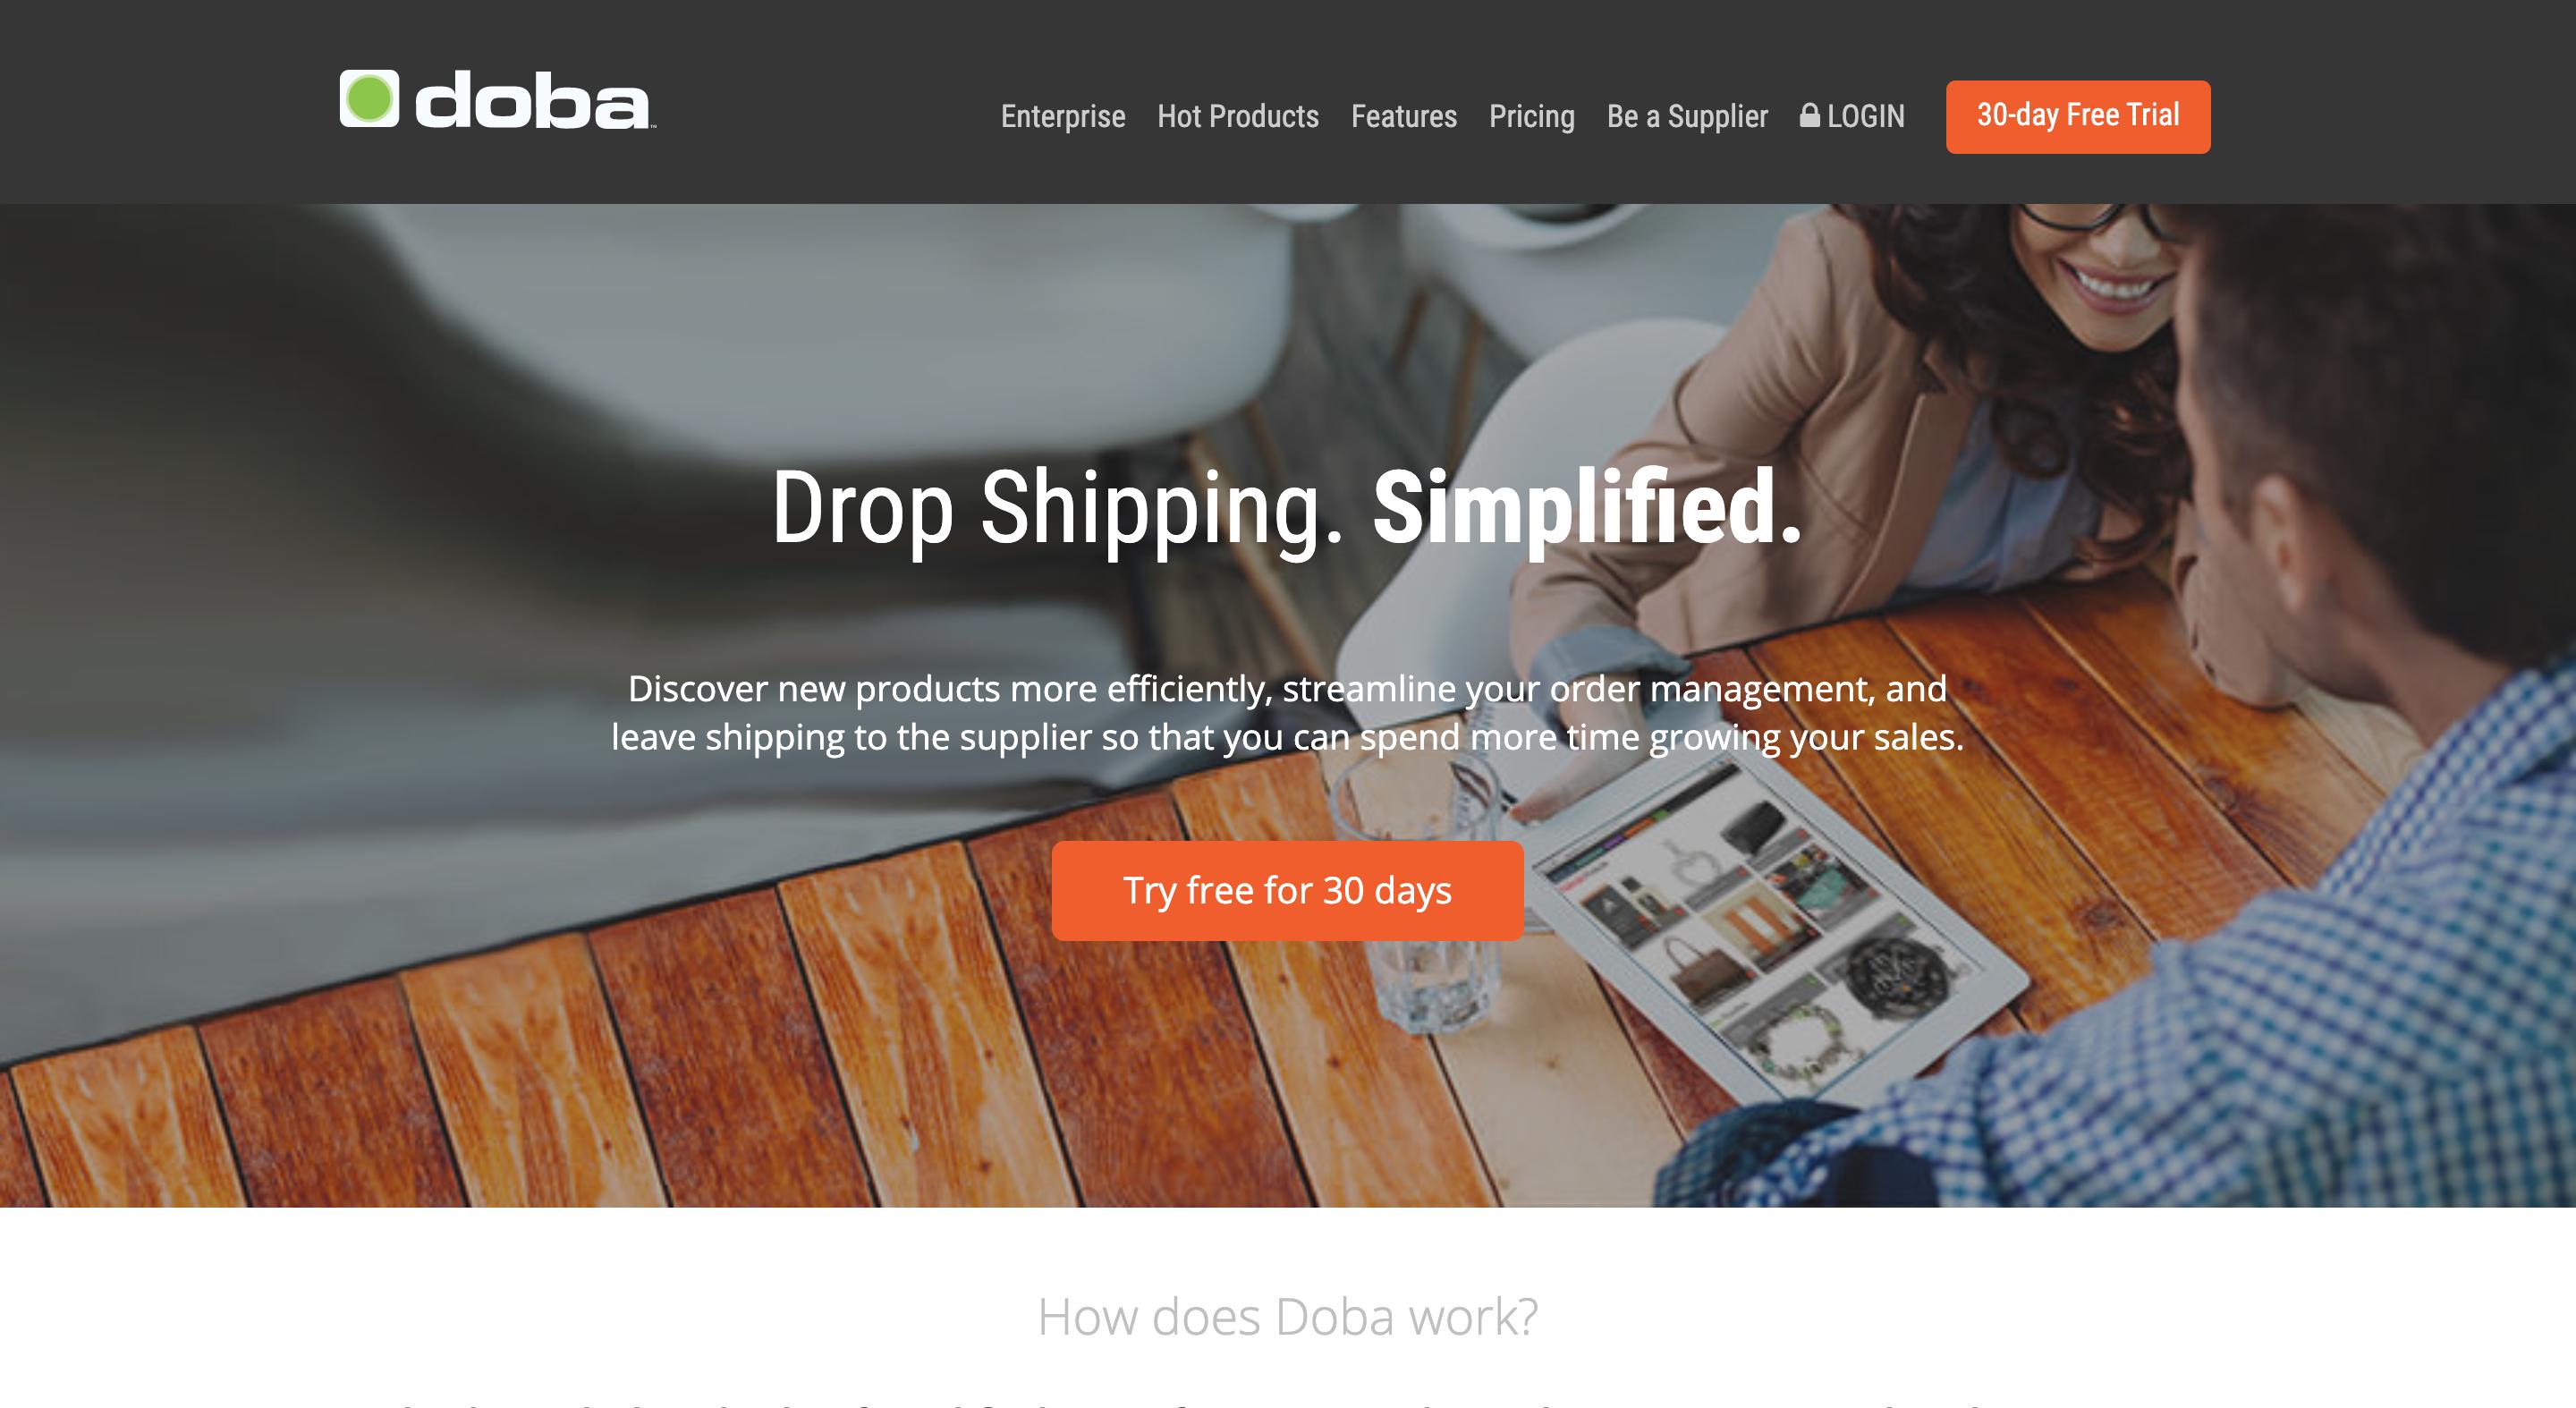 Doba dropshipping suppliers in the USA